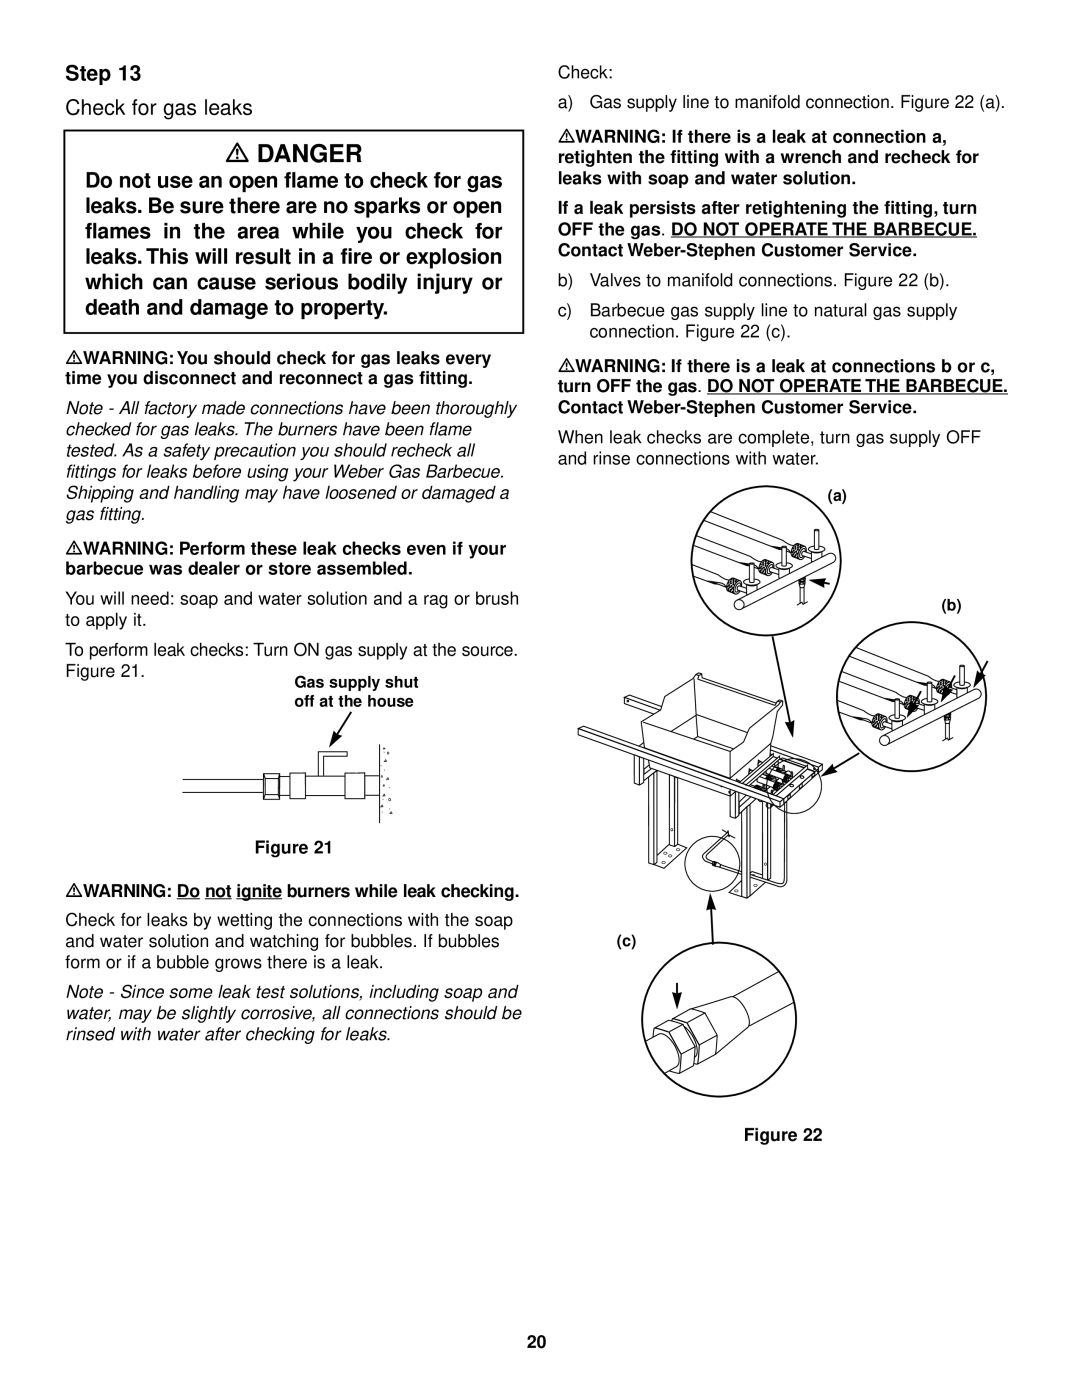 Weber 1500 LX owner manual Check for gas leaks, MWARNING Do not ignite burners while leak checking 